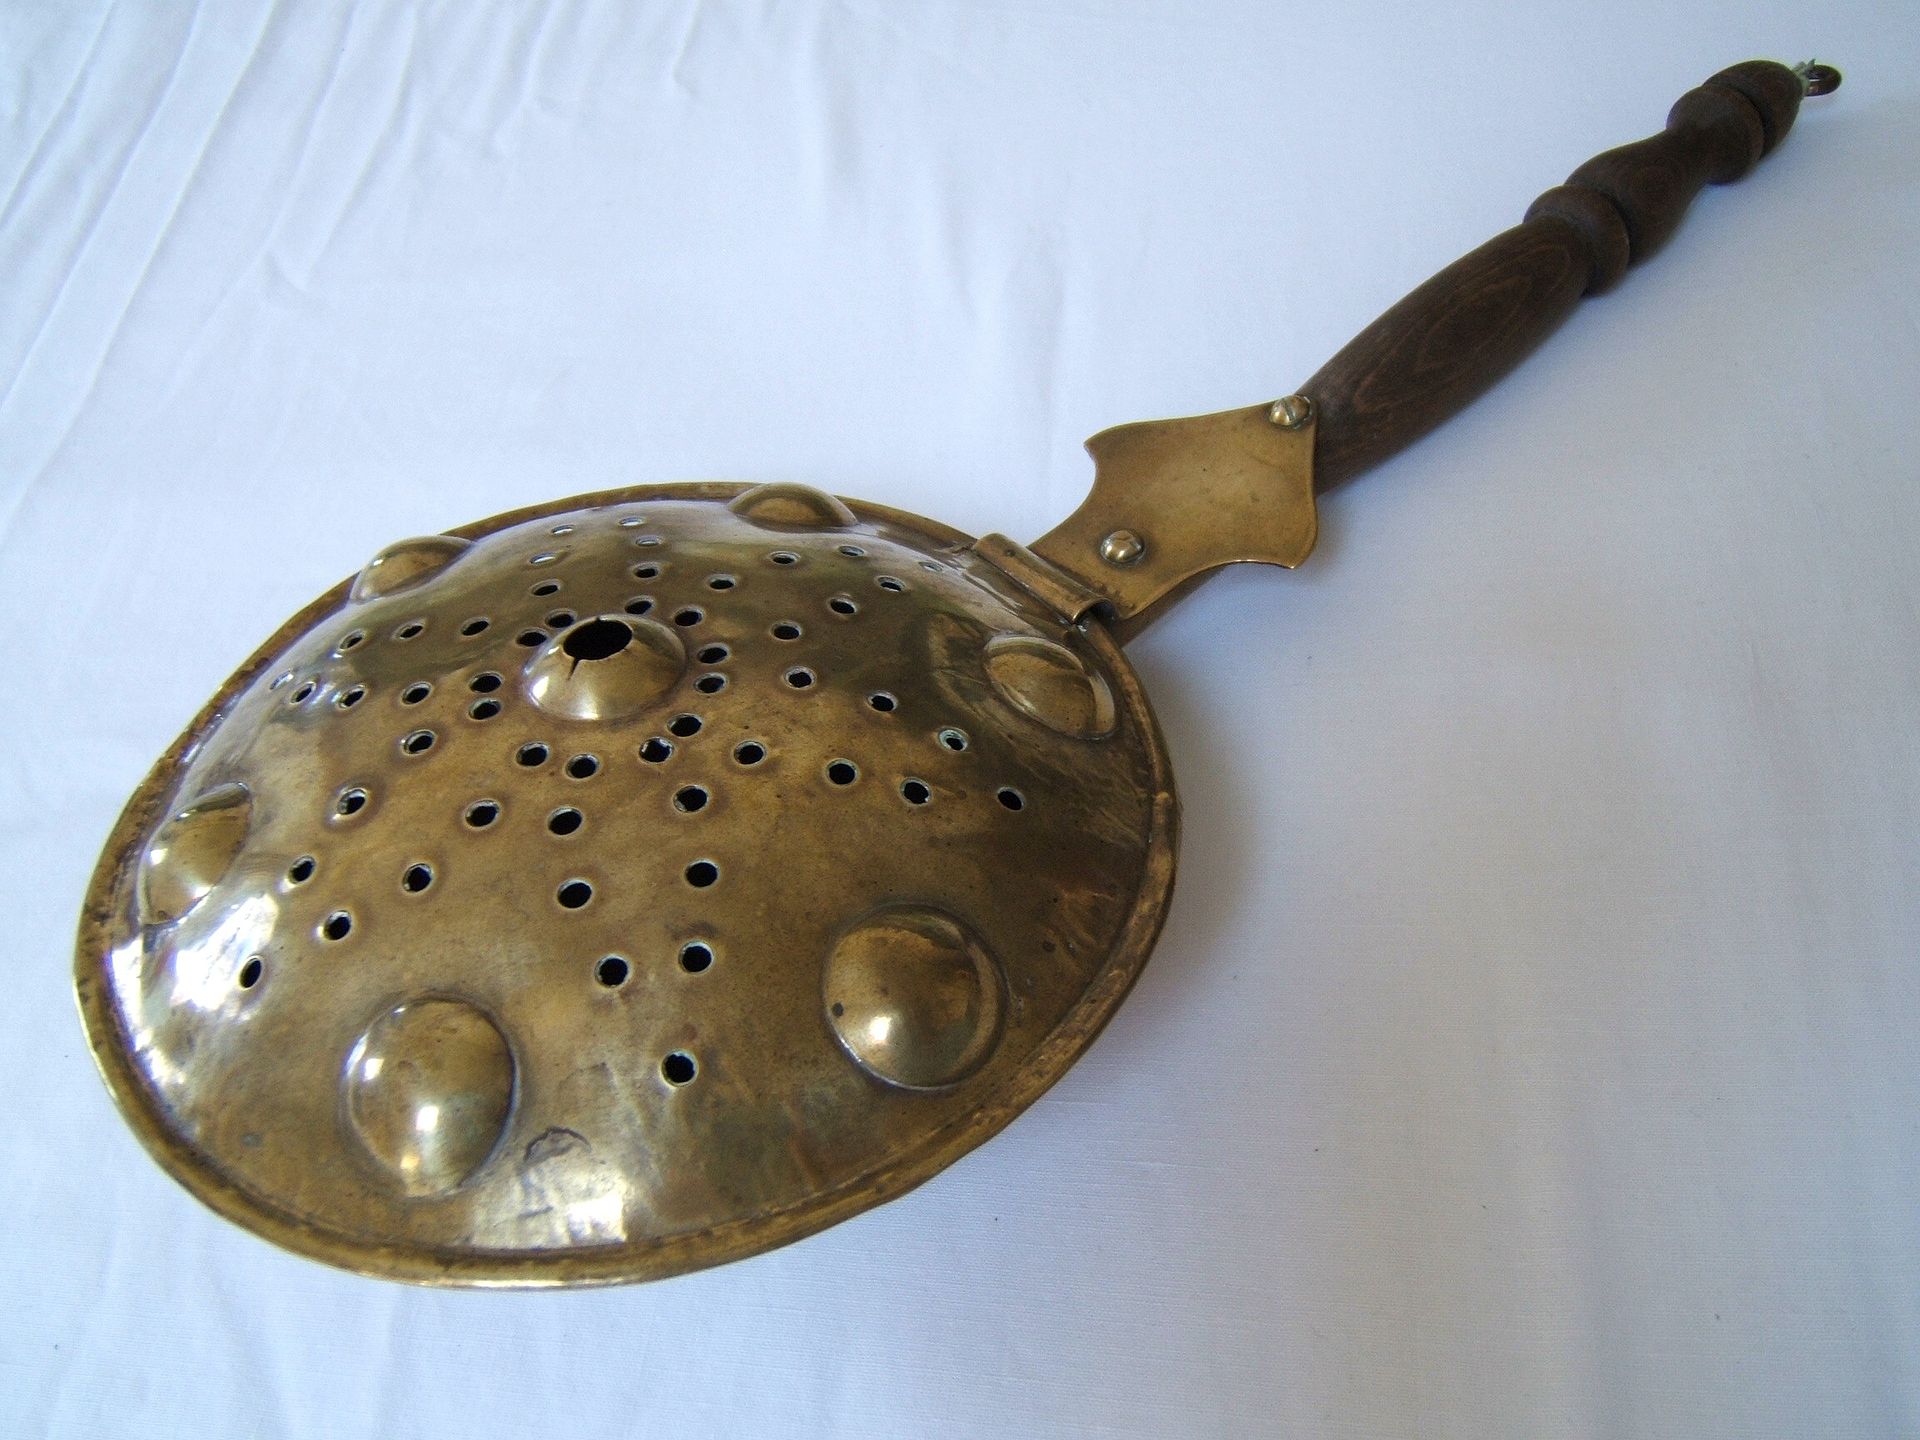 a round metal pan with a curved lid with many round holes and wooden handle